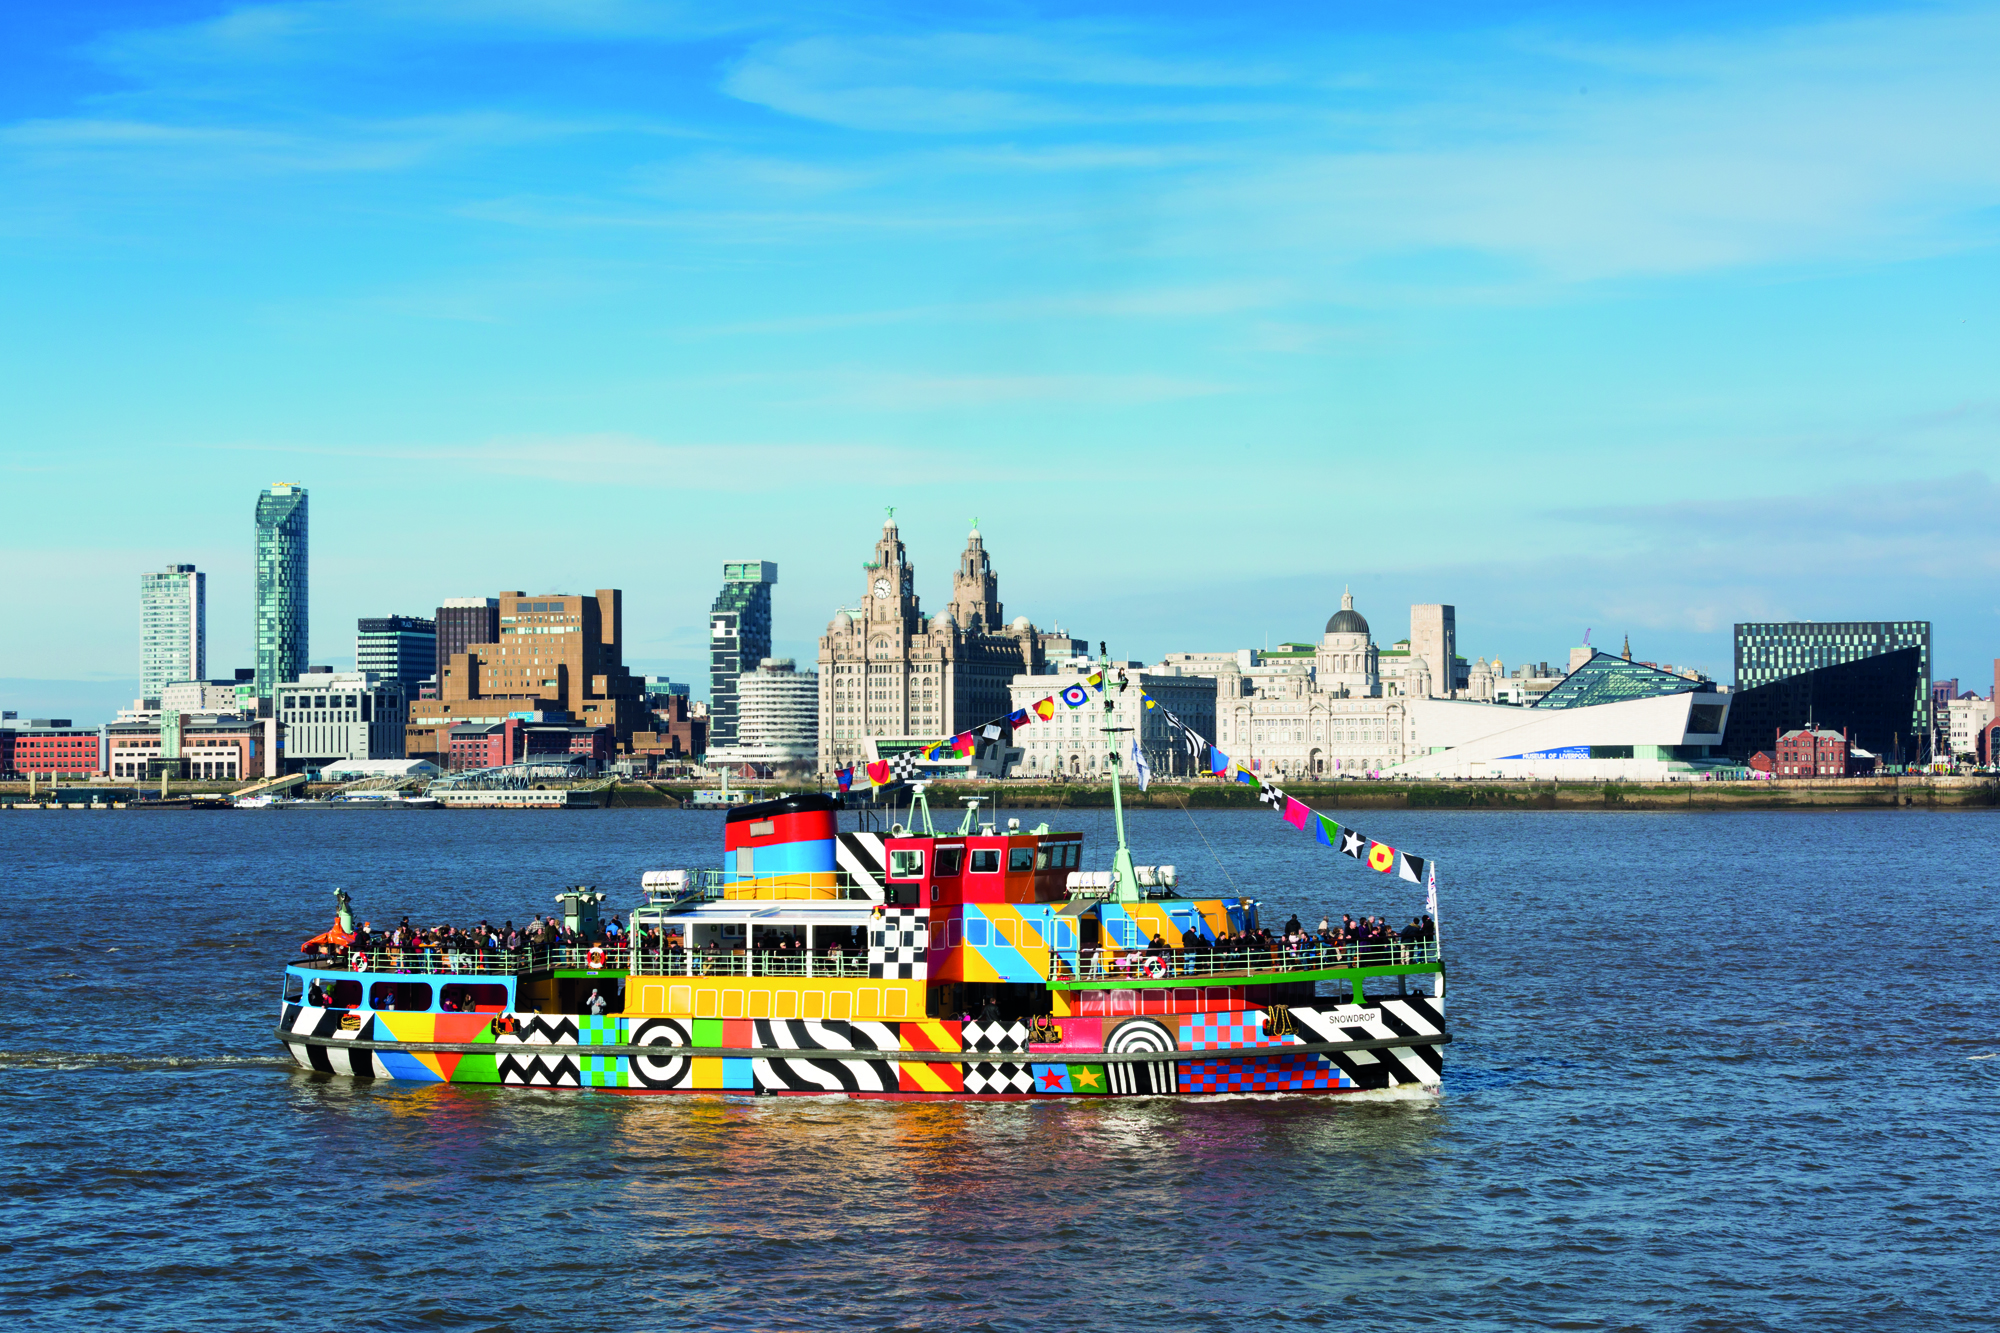 Mersey Ferry - Snowdrop (Dazzle) on the River Mersey in front of the waterfront